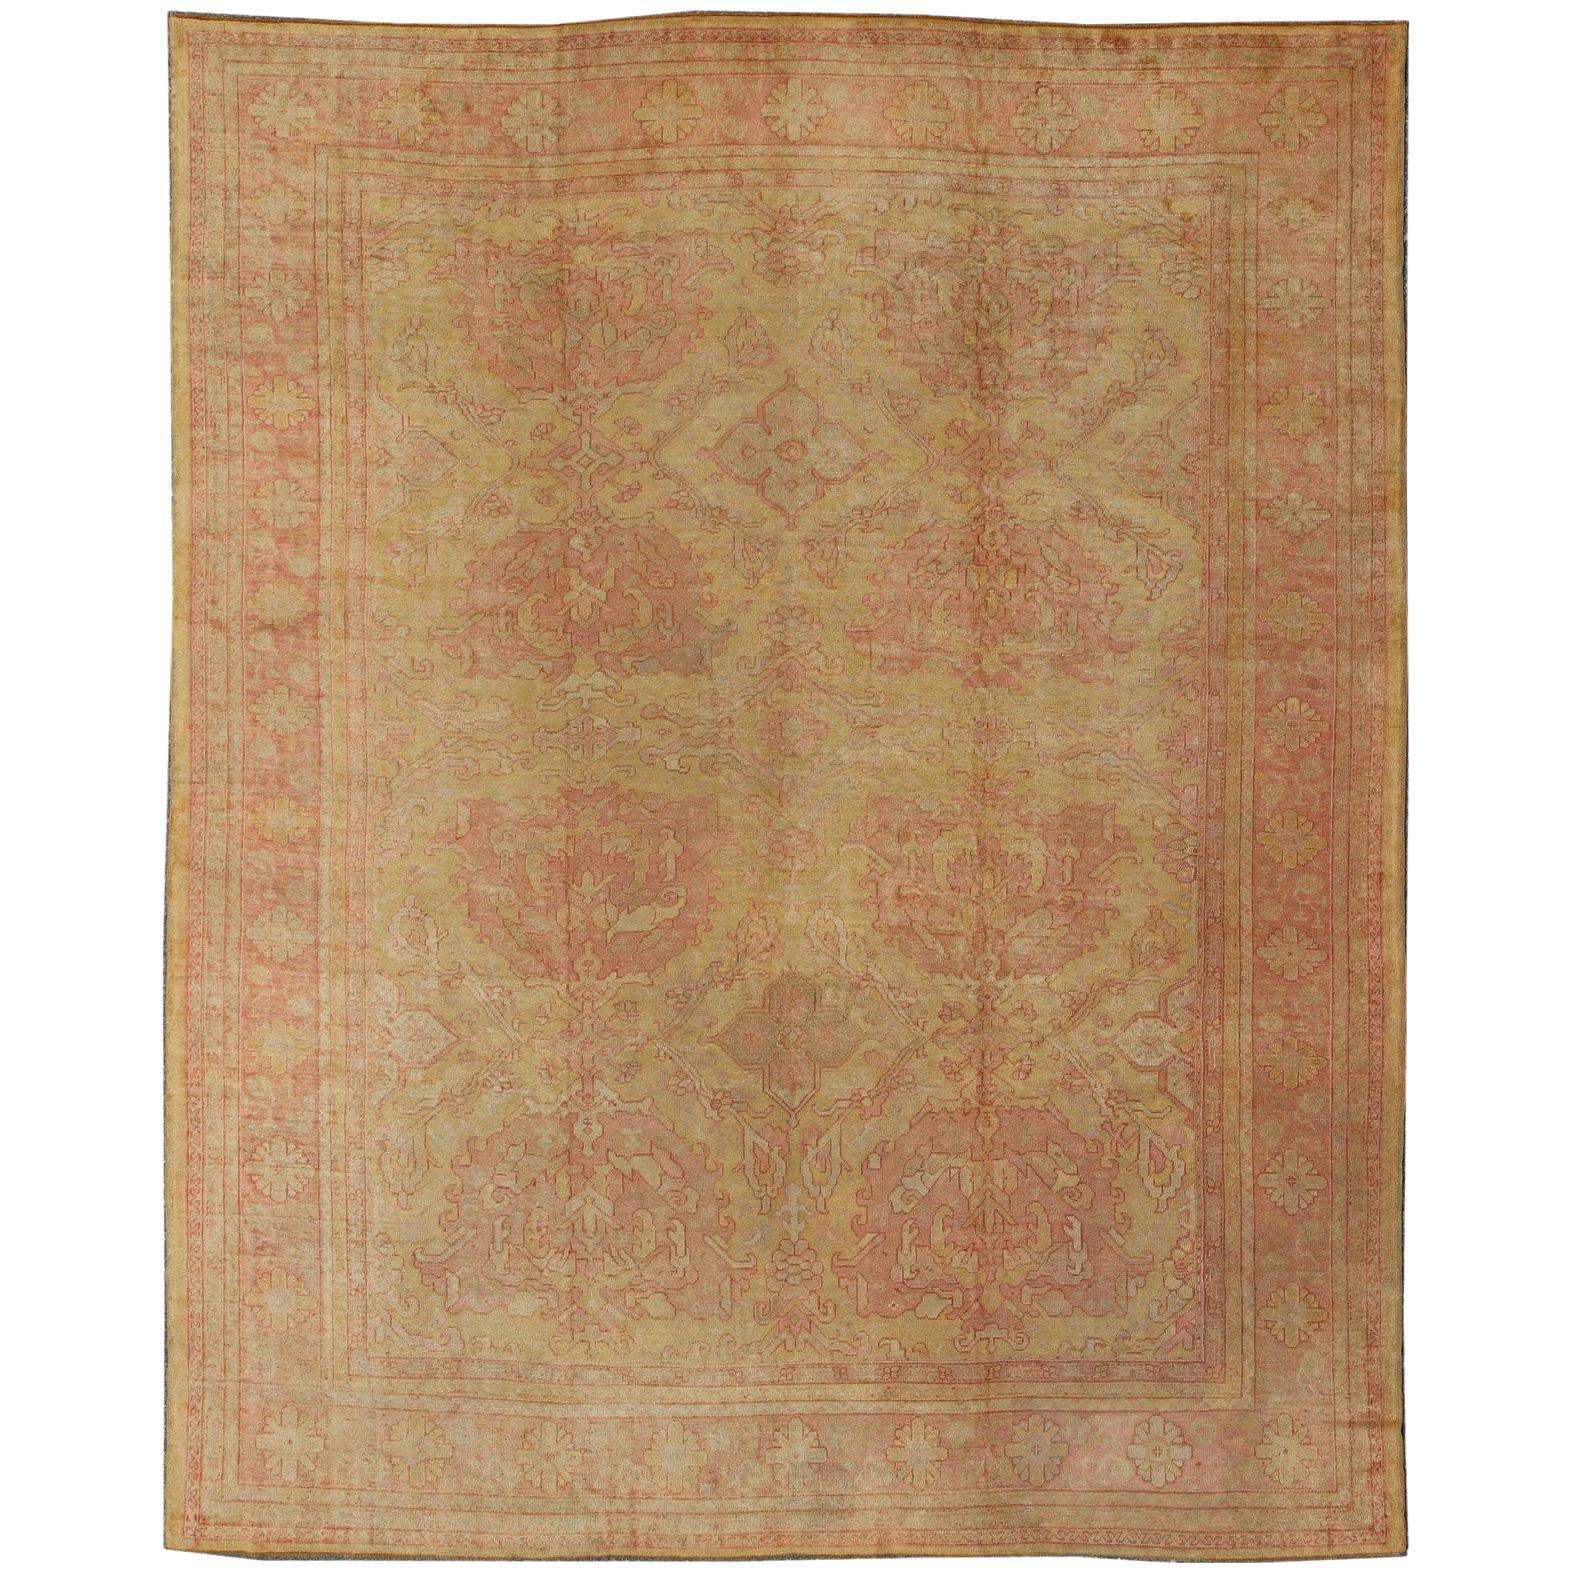 Antique Turkish Oushak Rug with Large Floral Motifs in Cream Yellow, Muted Coral For Sale